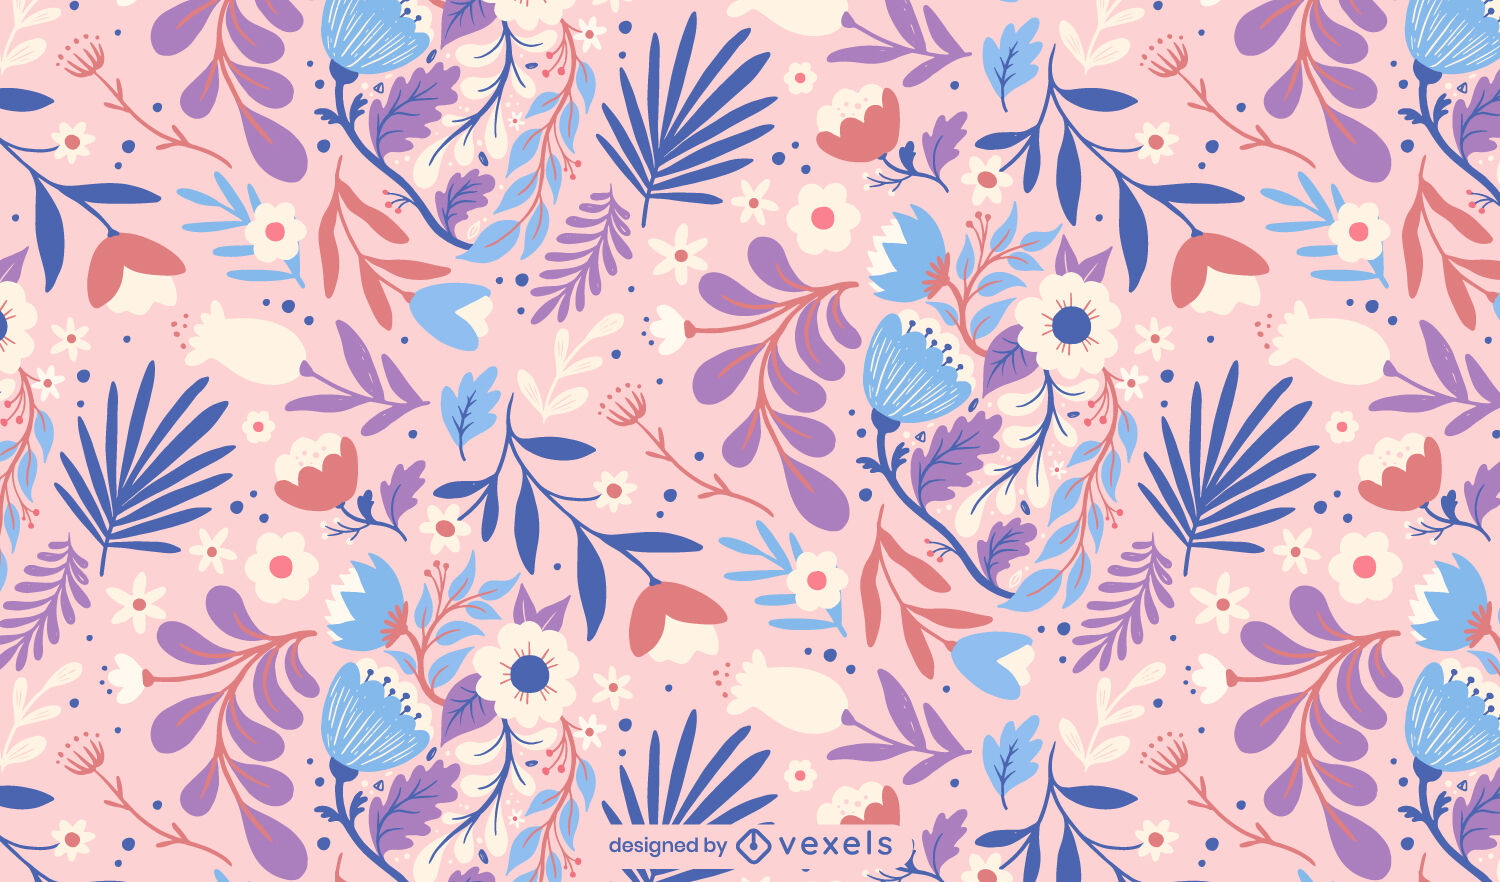 Colorful flowers and plants pattern design